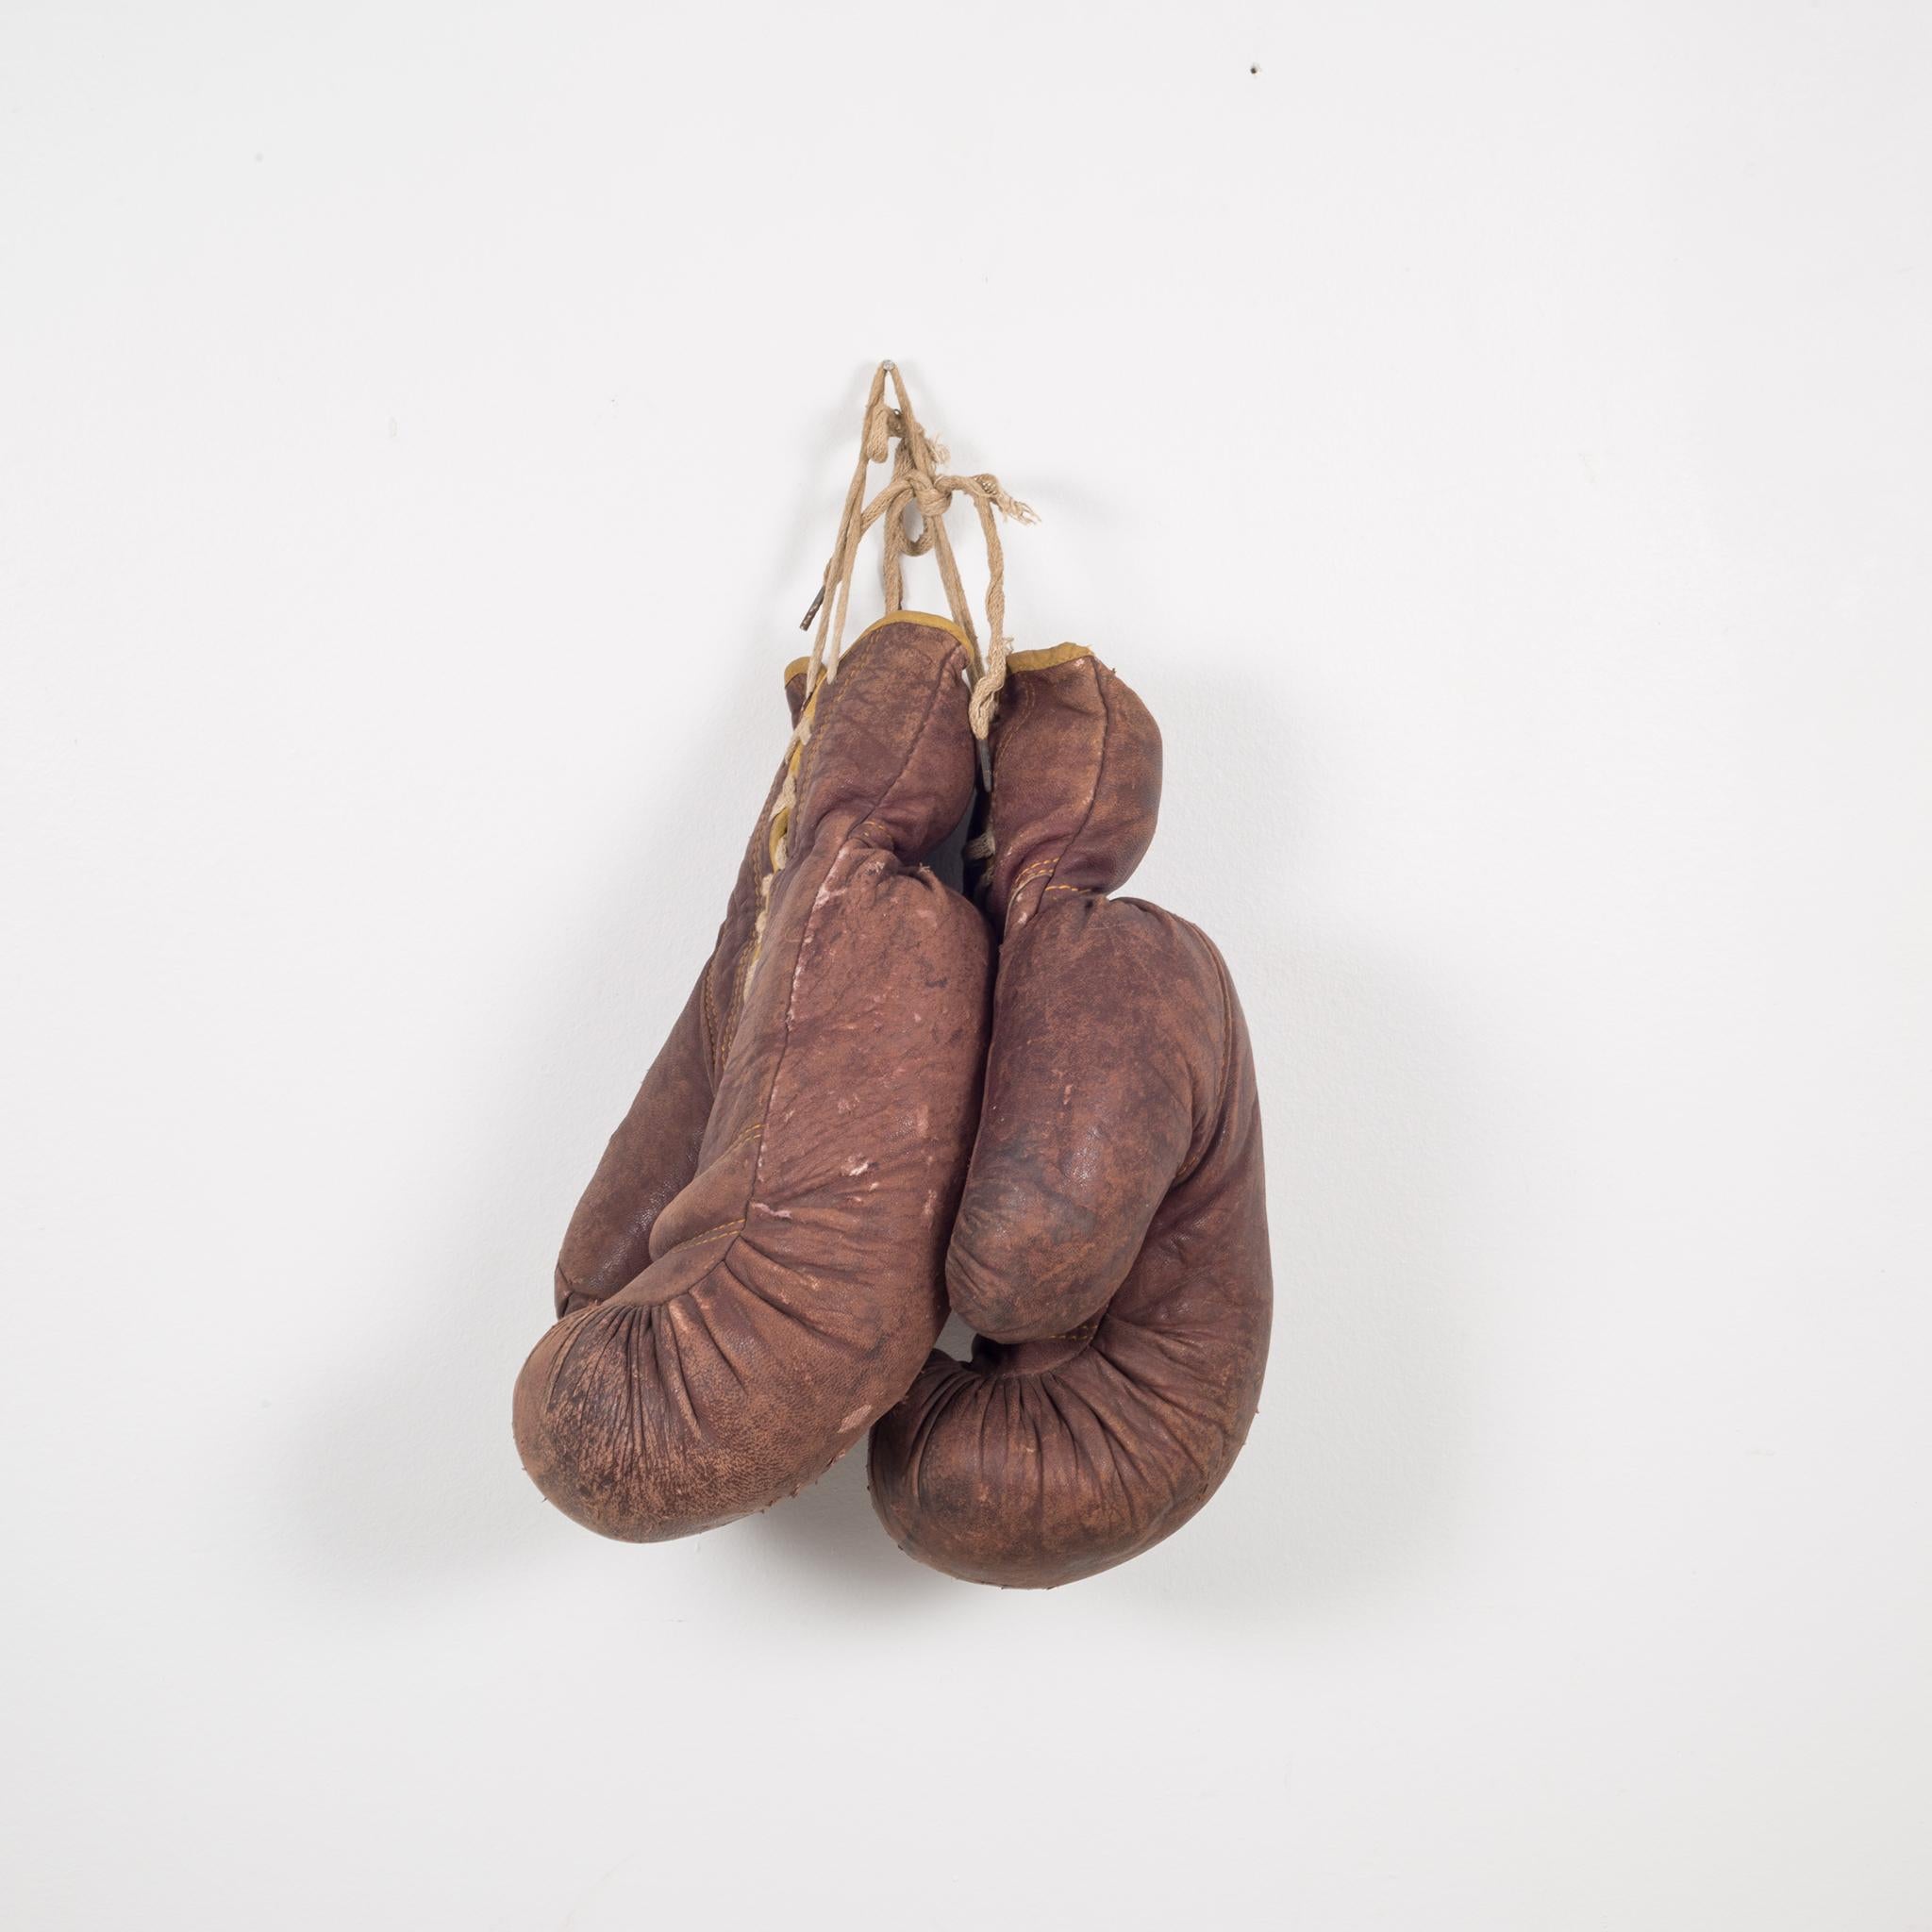 1940 boxing gloves